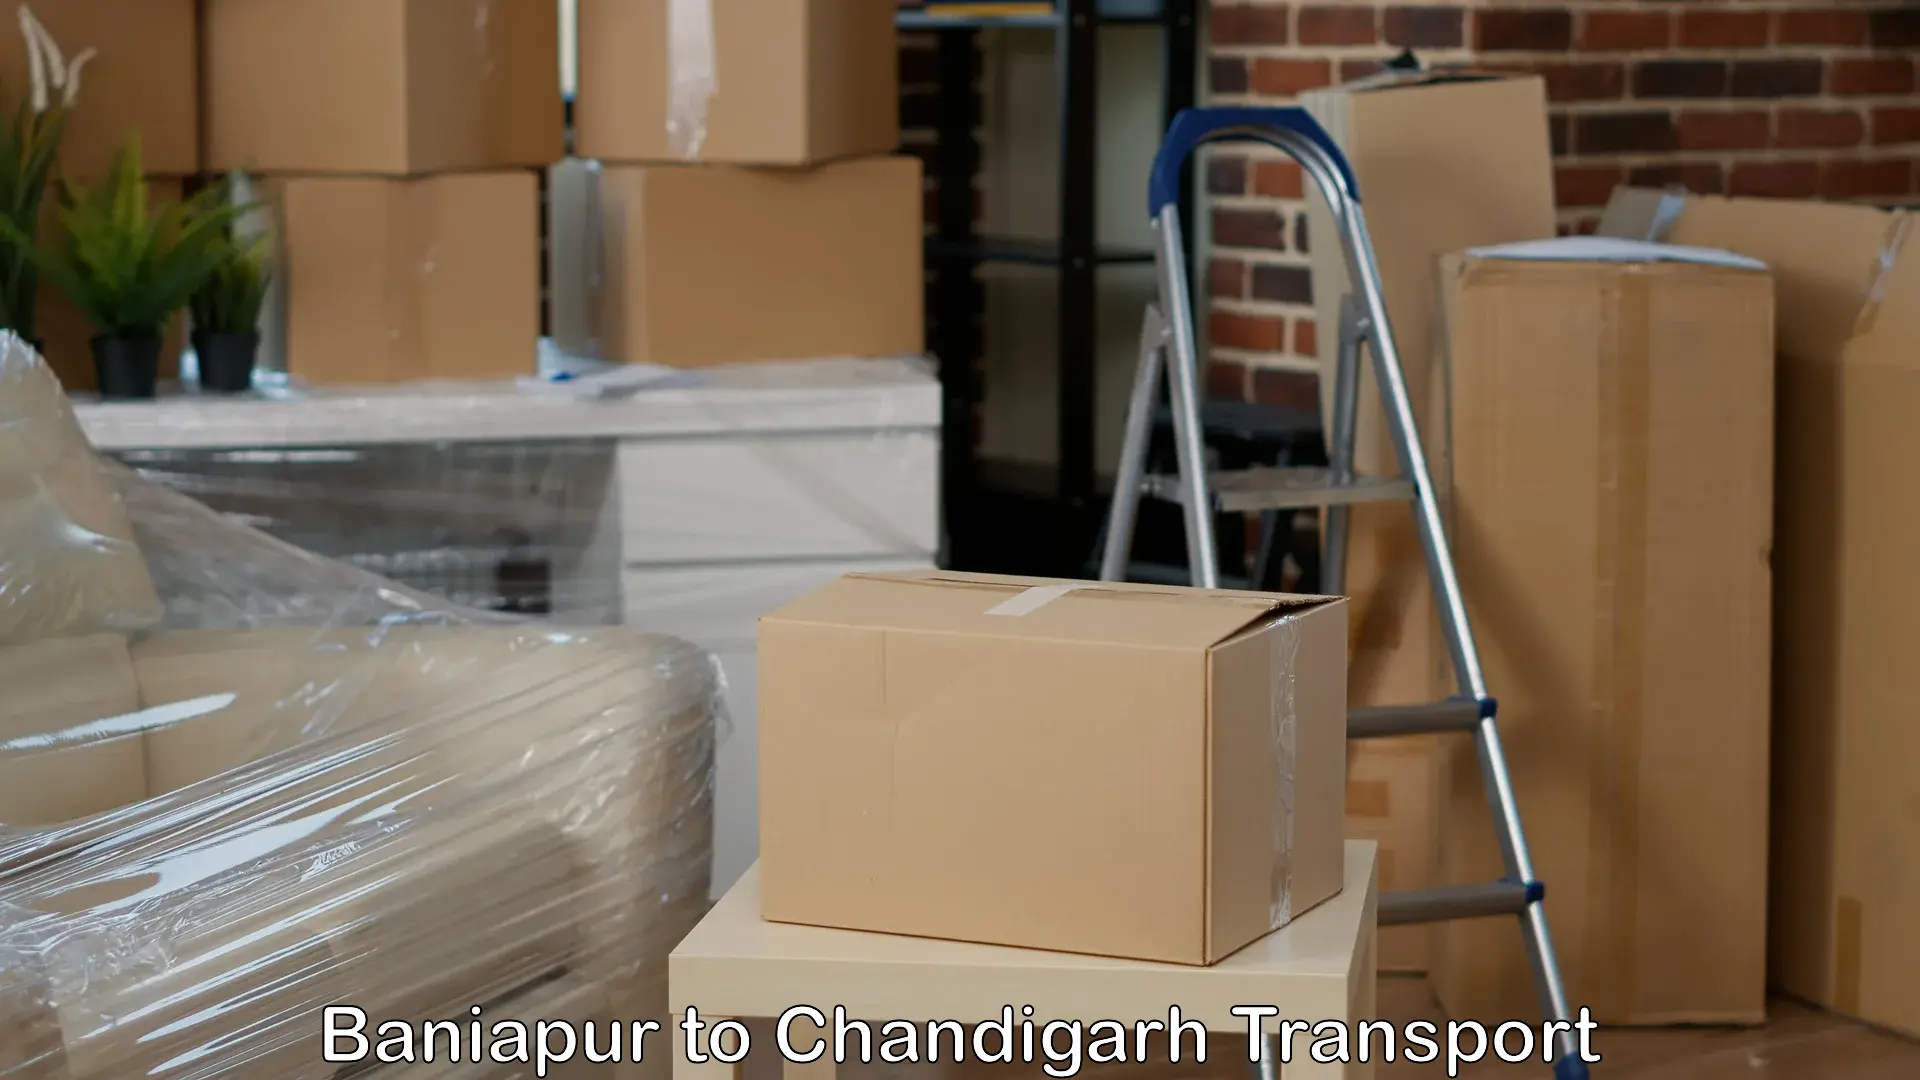 Road transport online services Baniapur to Chandigarh